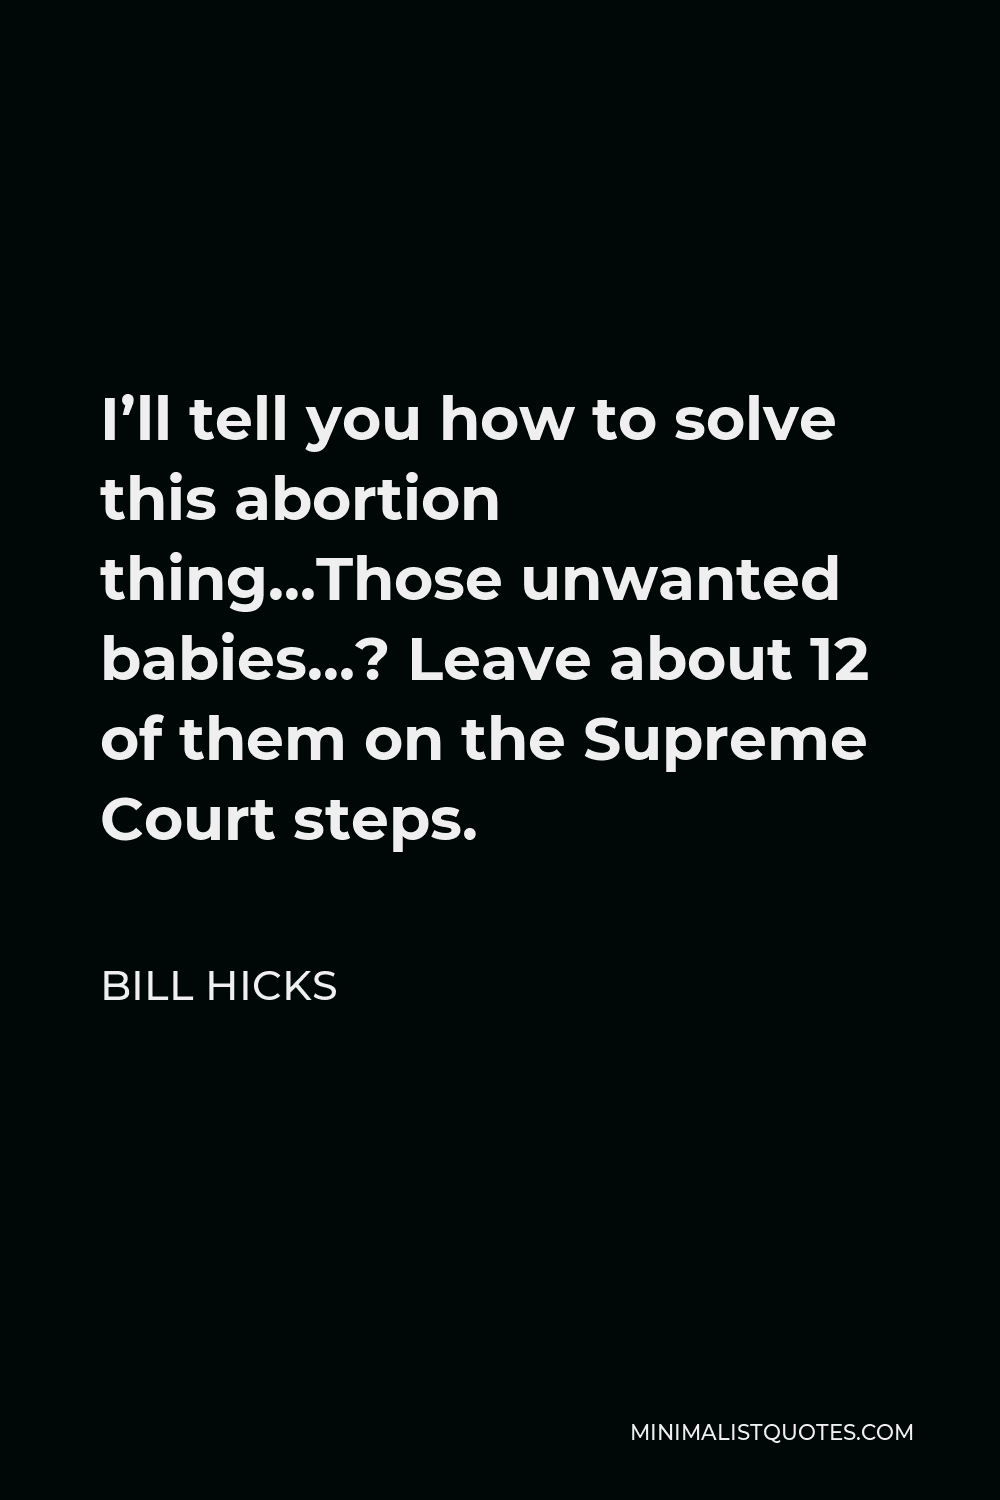 Bill Hicks Quote - I’ll tell you how to solve this abortion thing…Those unwanted babies…? Leave about 12 of them on the Supreme Court steps.